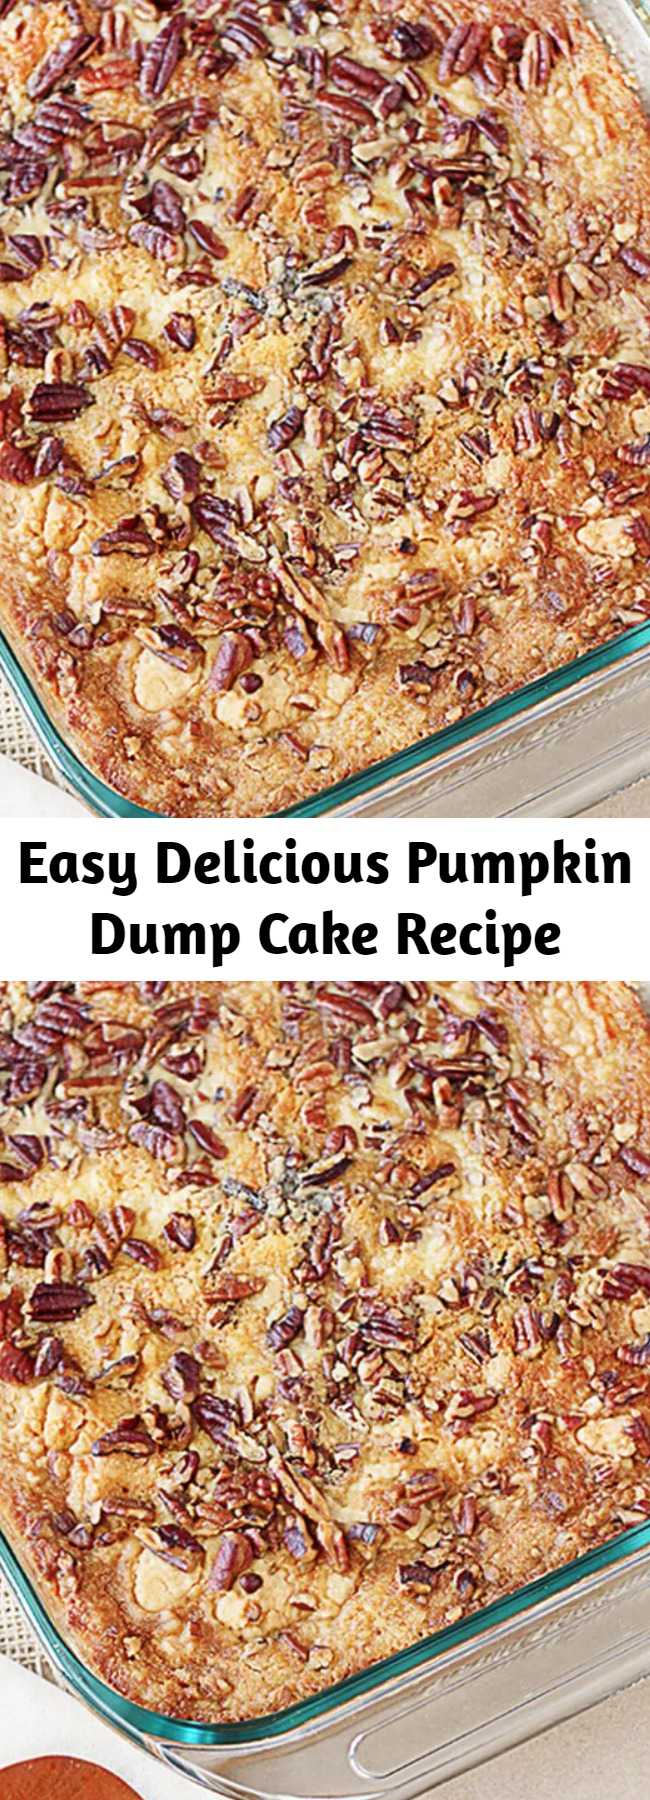 Easy Delicious Pumpkin Dump Cake Recipe - This recipe is a sure fire win for all of you pumpkin lovers!  Yellow cake mix, pumpkin, butter and pecans are the ingredients that make this Pumpkin Dump Cake a favorite — and ready under an hour! The name is exactly how the recipe comes together — by ‘dumping’ the ingredients into a 13×9 cake pan.  After baking, add a dollop of whip cream and enjoy this heavenly delight!